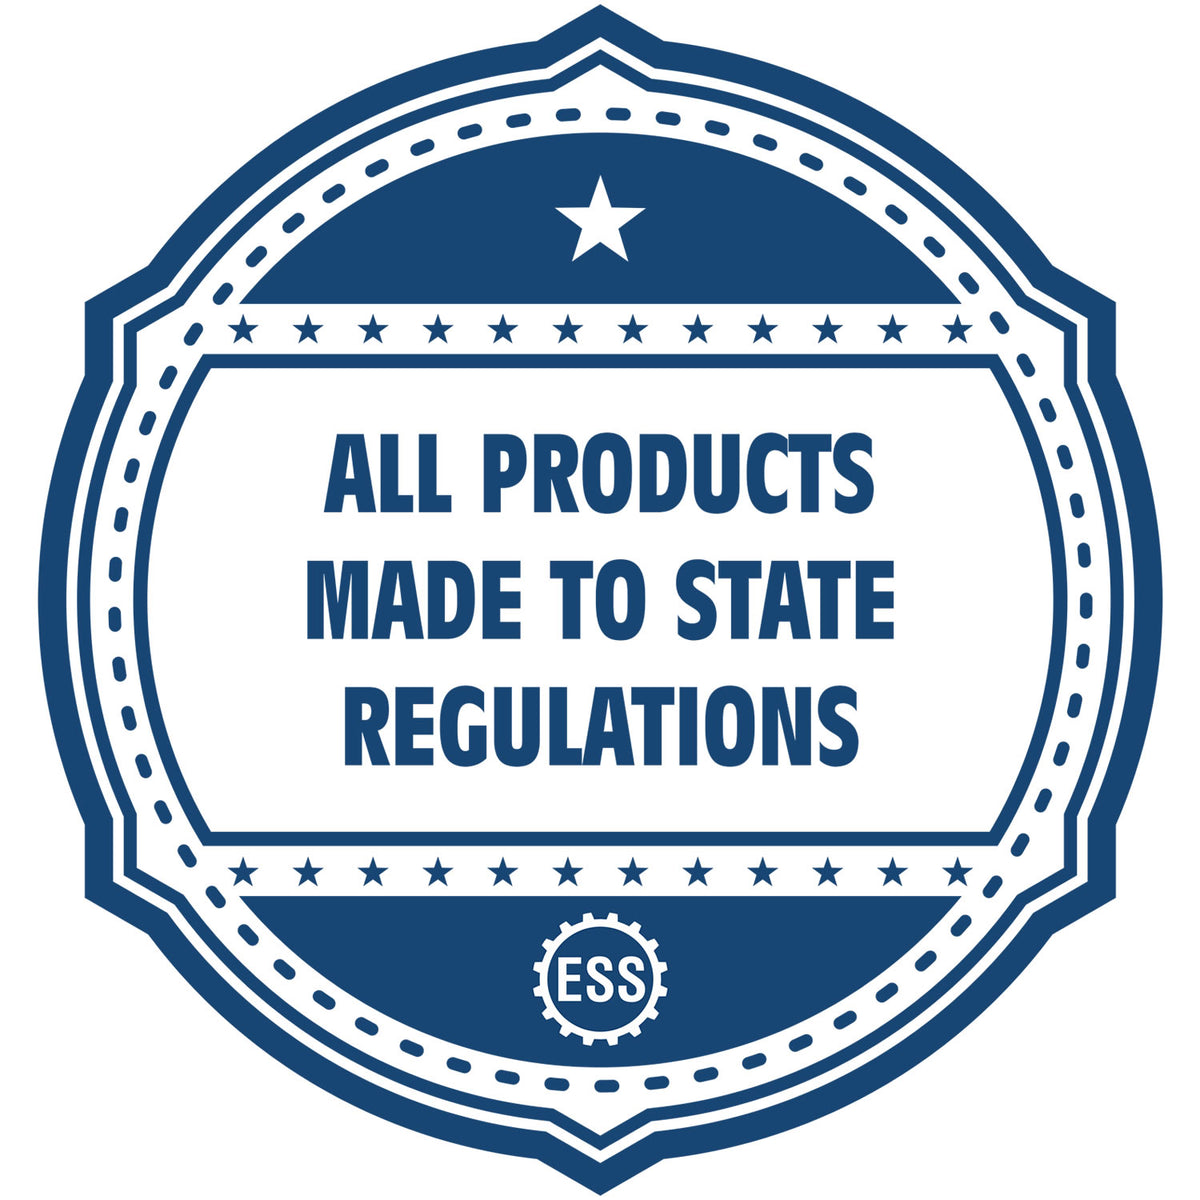 An icon or badge element for the Digital Missouri PE Stamp and Electronic Seal for Missouri Engineer showing that this product is made in compliance with state regulations.